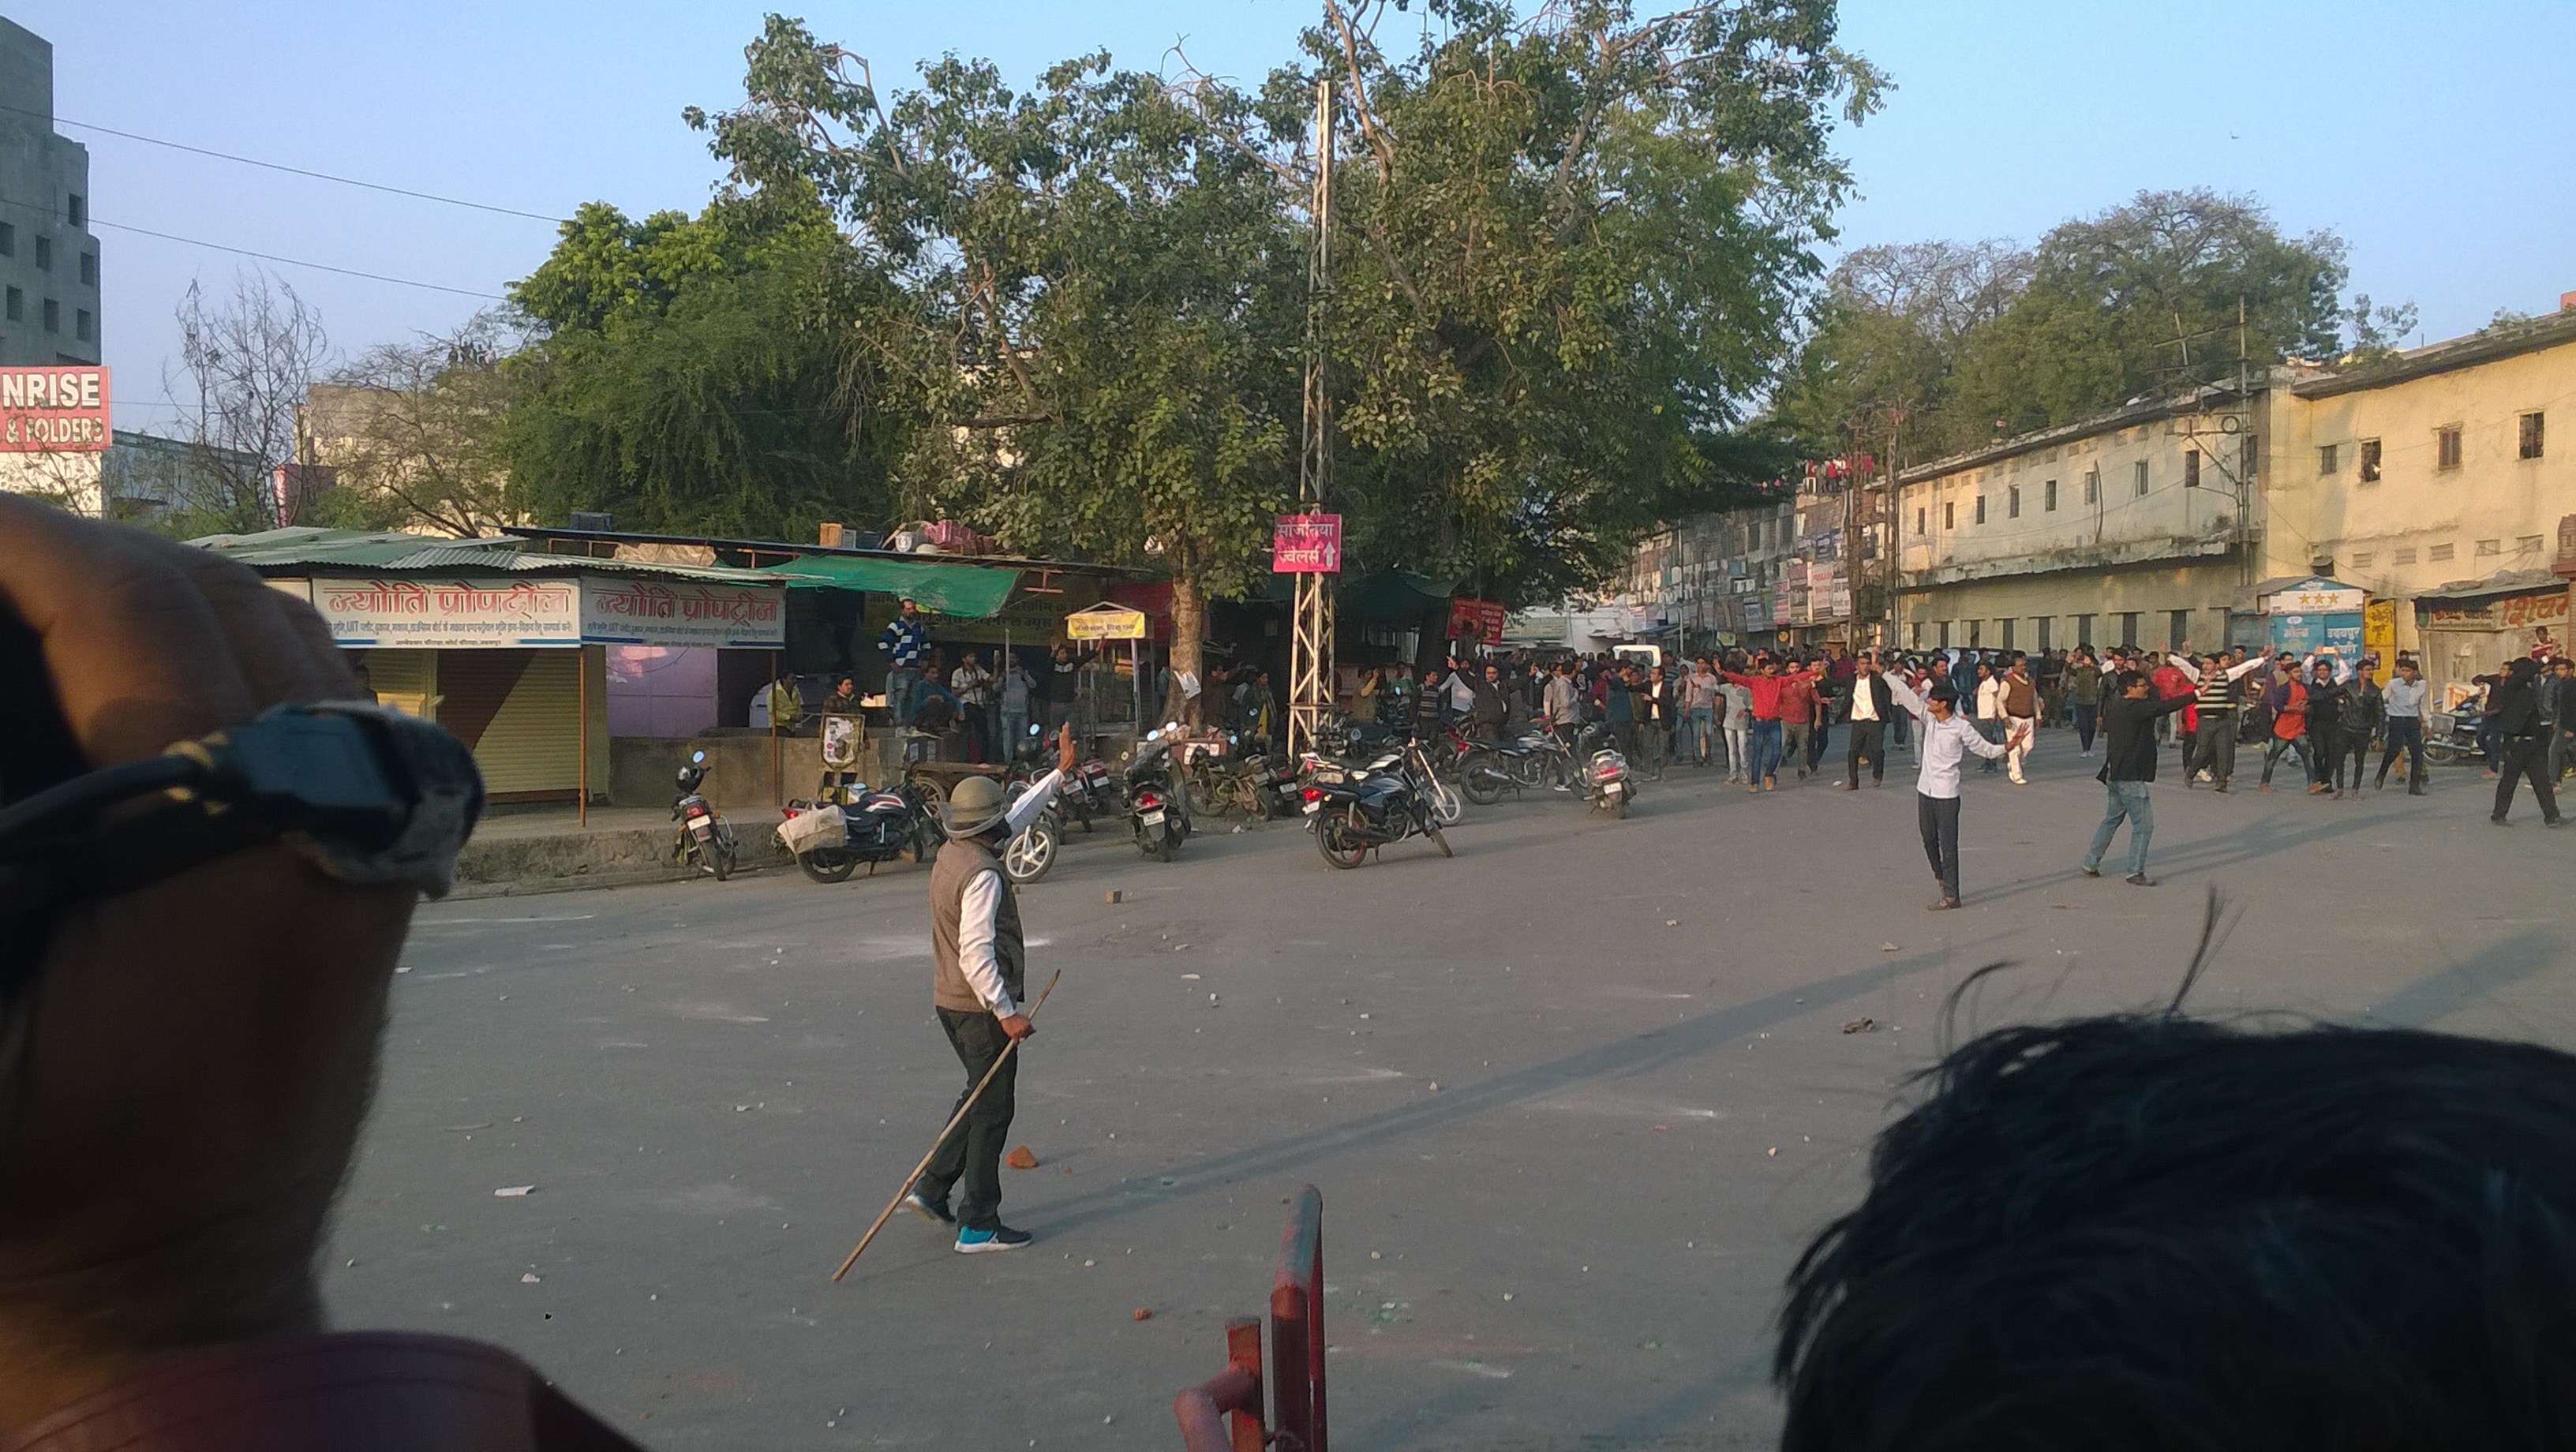 [Pictures] Unrest in Udaipur